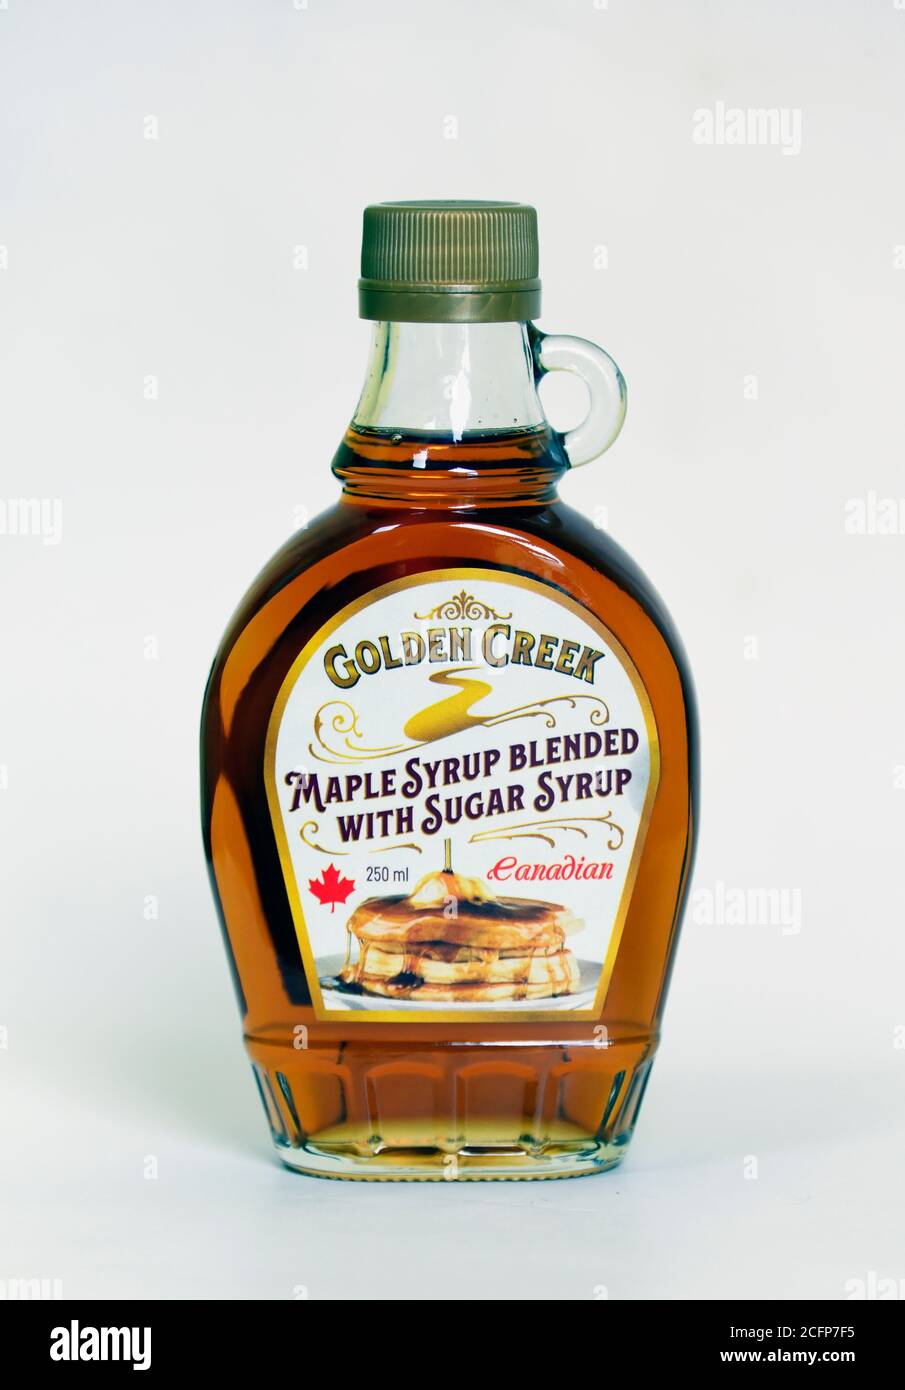 Bottle of 'Golden Creek' Canadian maple syrup blended with sugar syrup. 250ml. Stock Photo